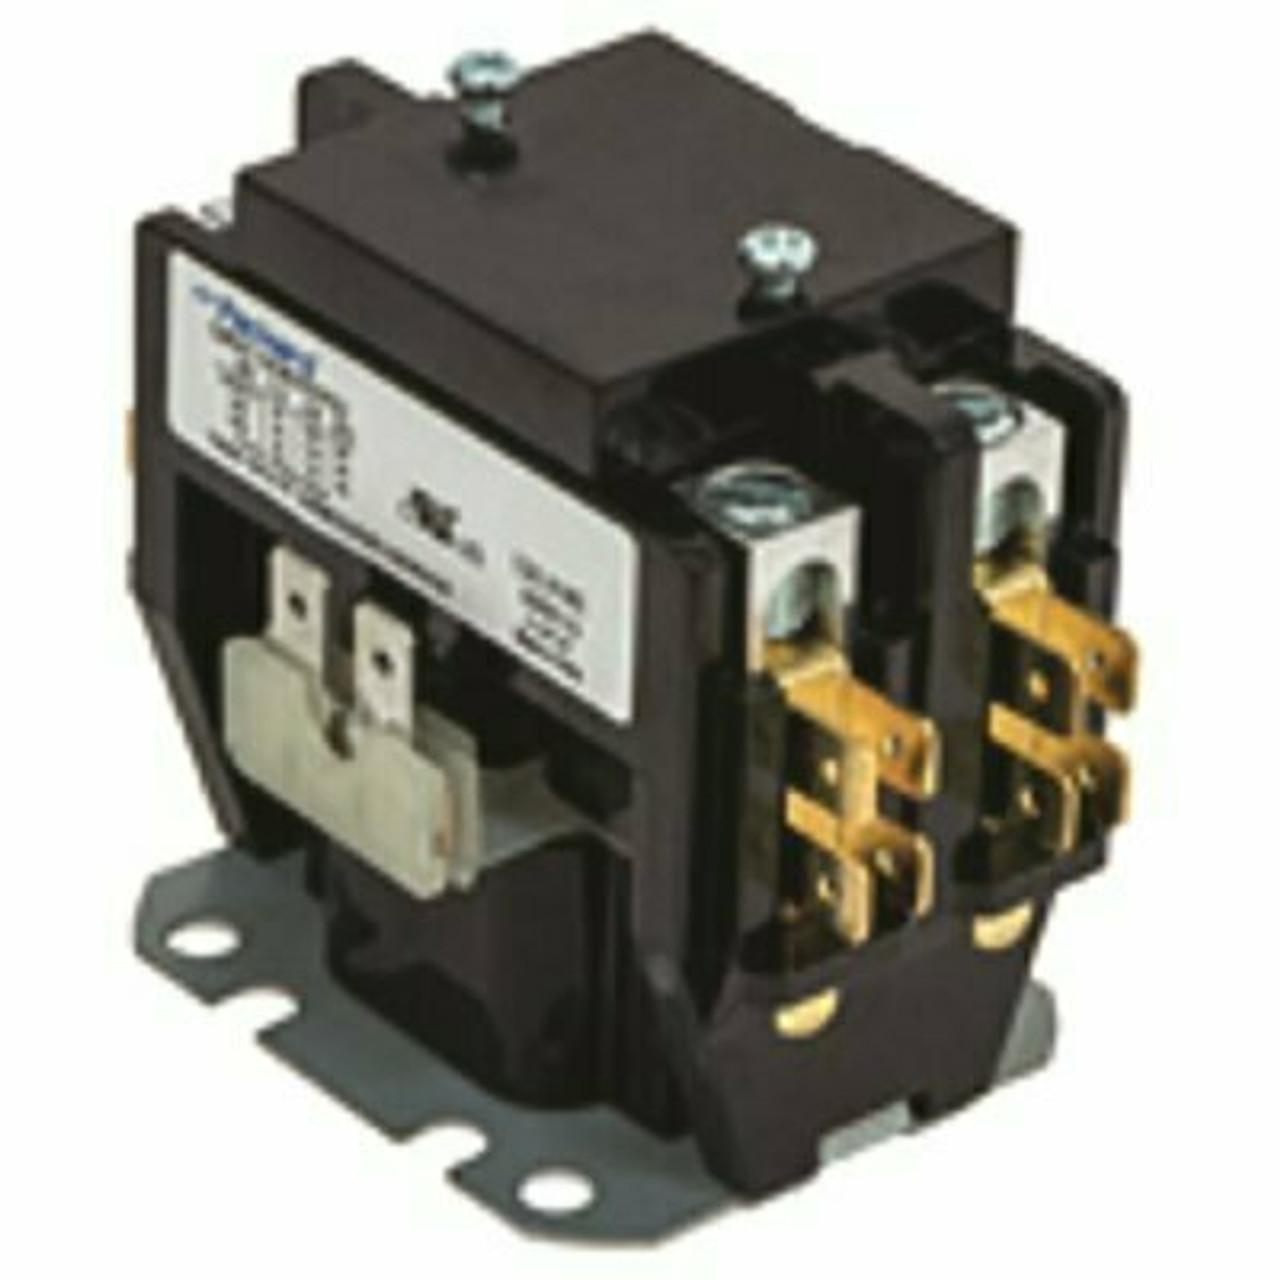 Packard 2 Pole 40 Amp 208/240 Vac Contactor